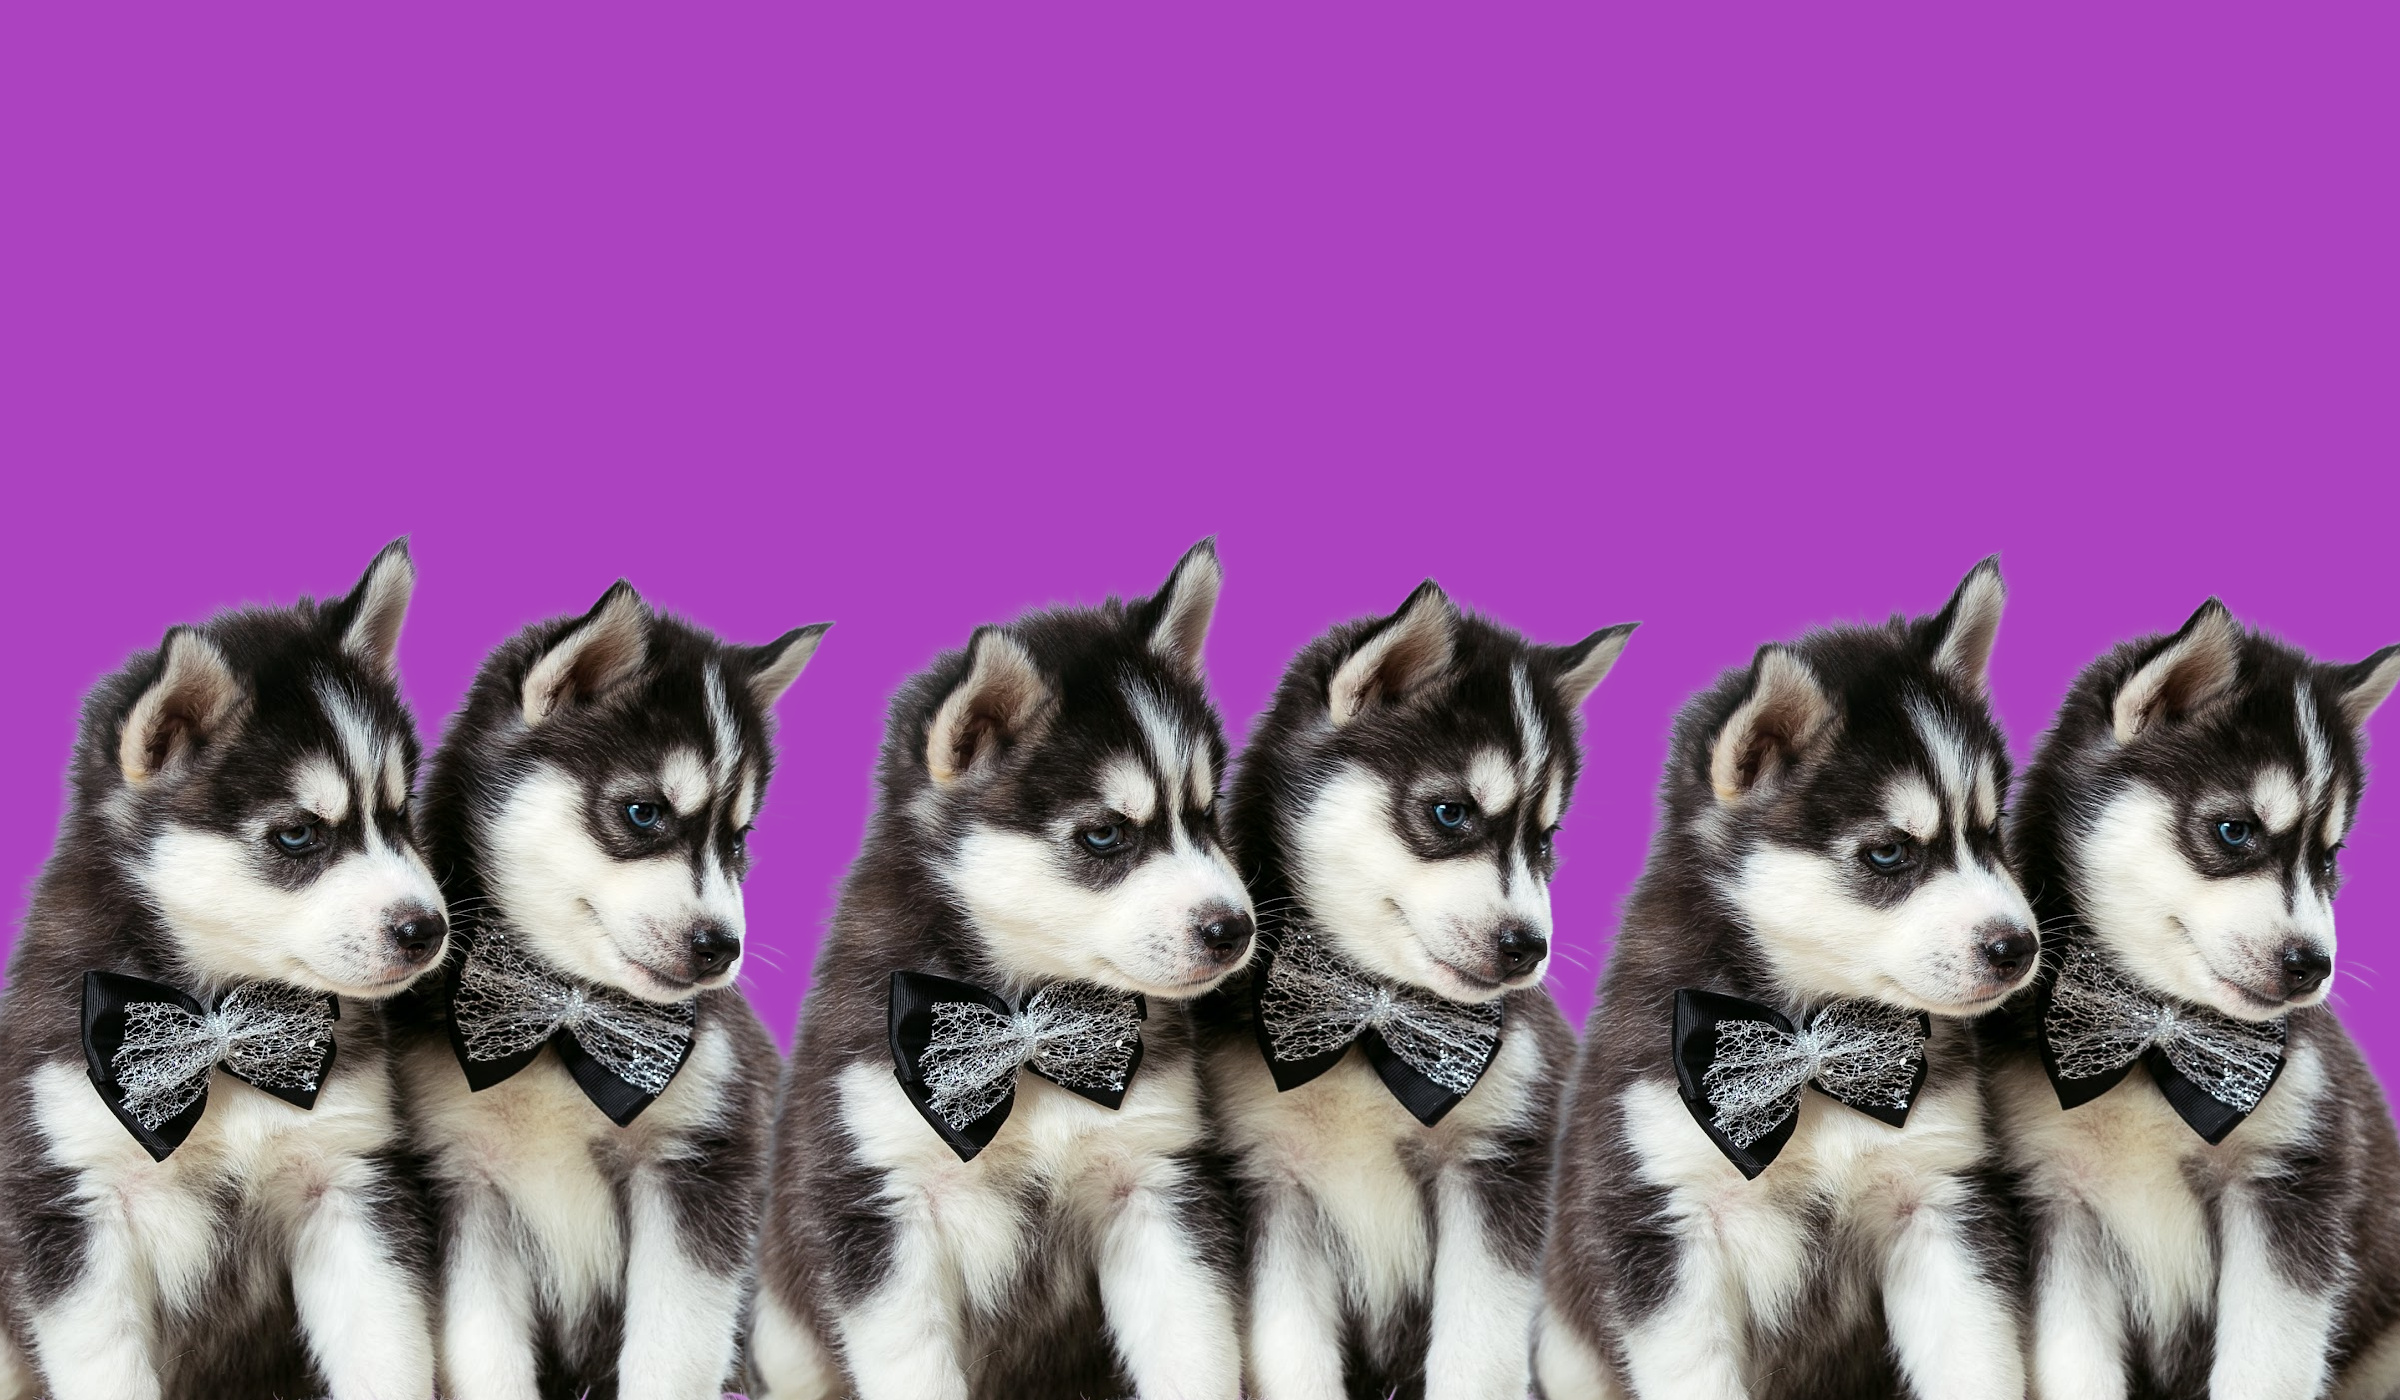 Three identical pairs of puppies, seated against a purple background